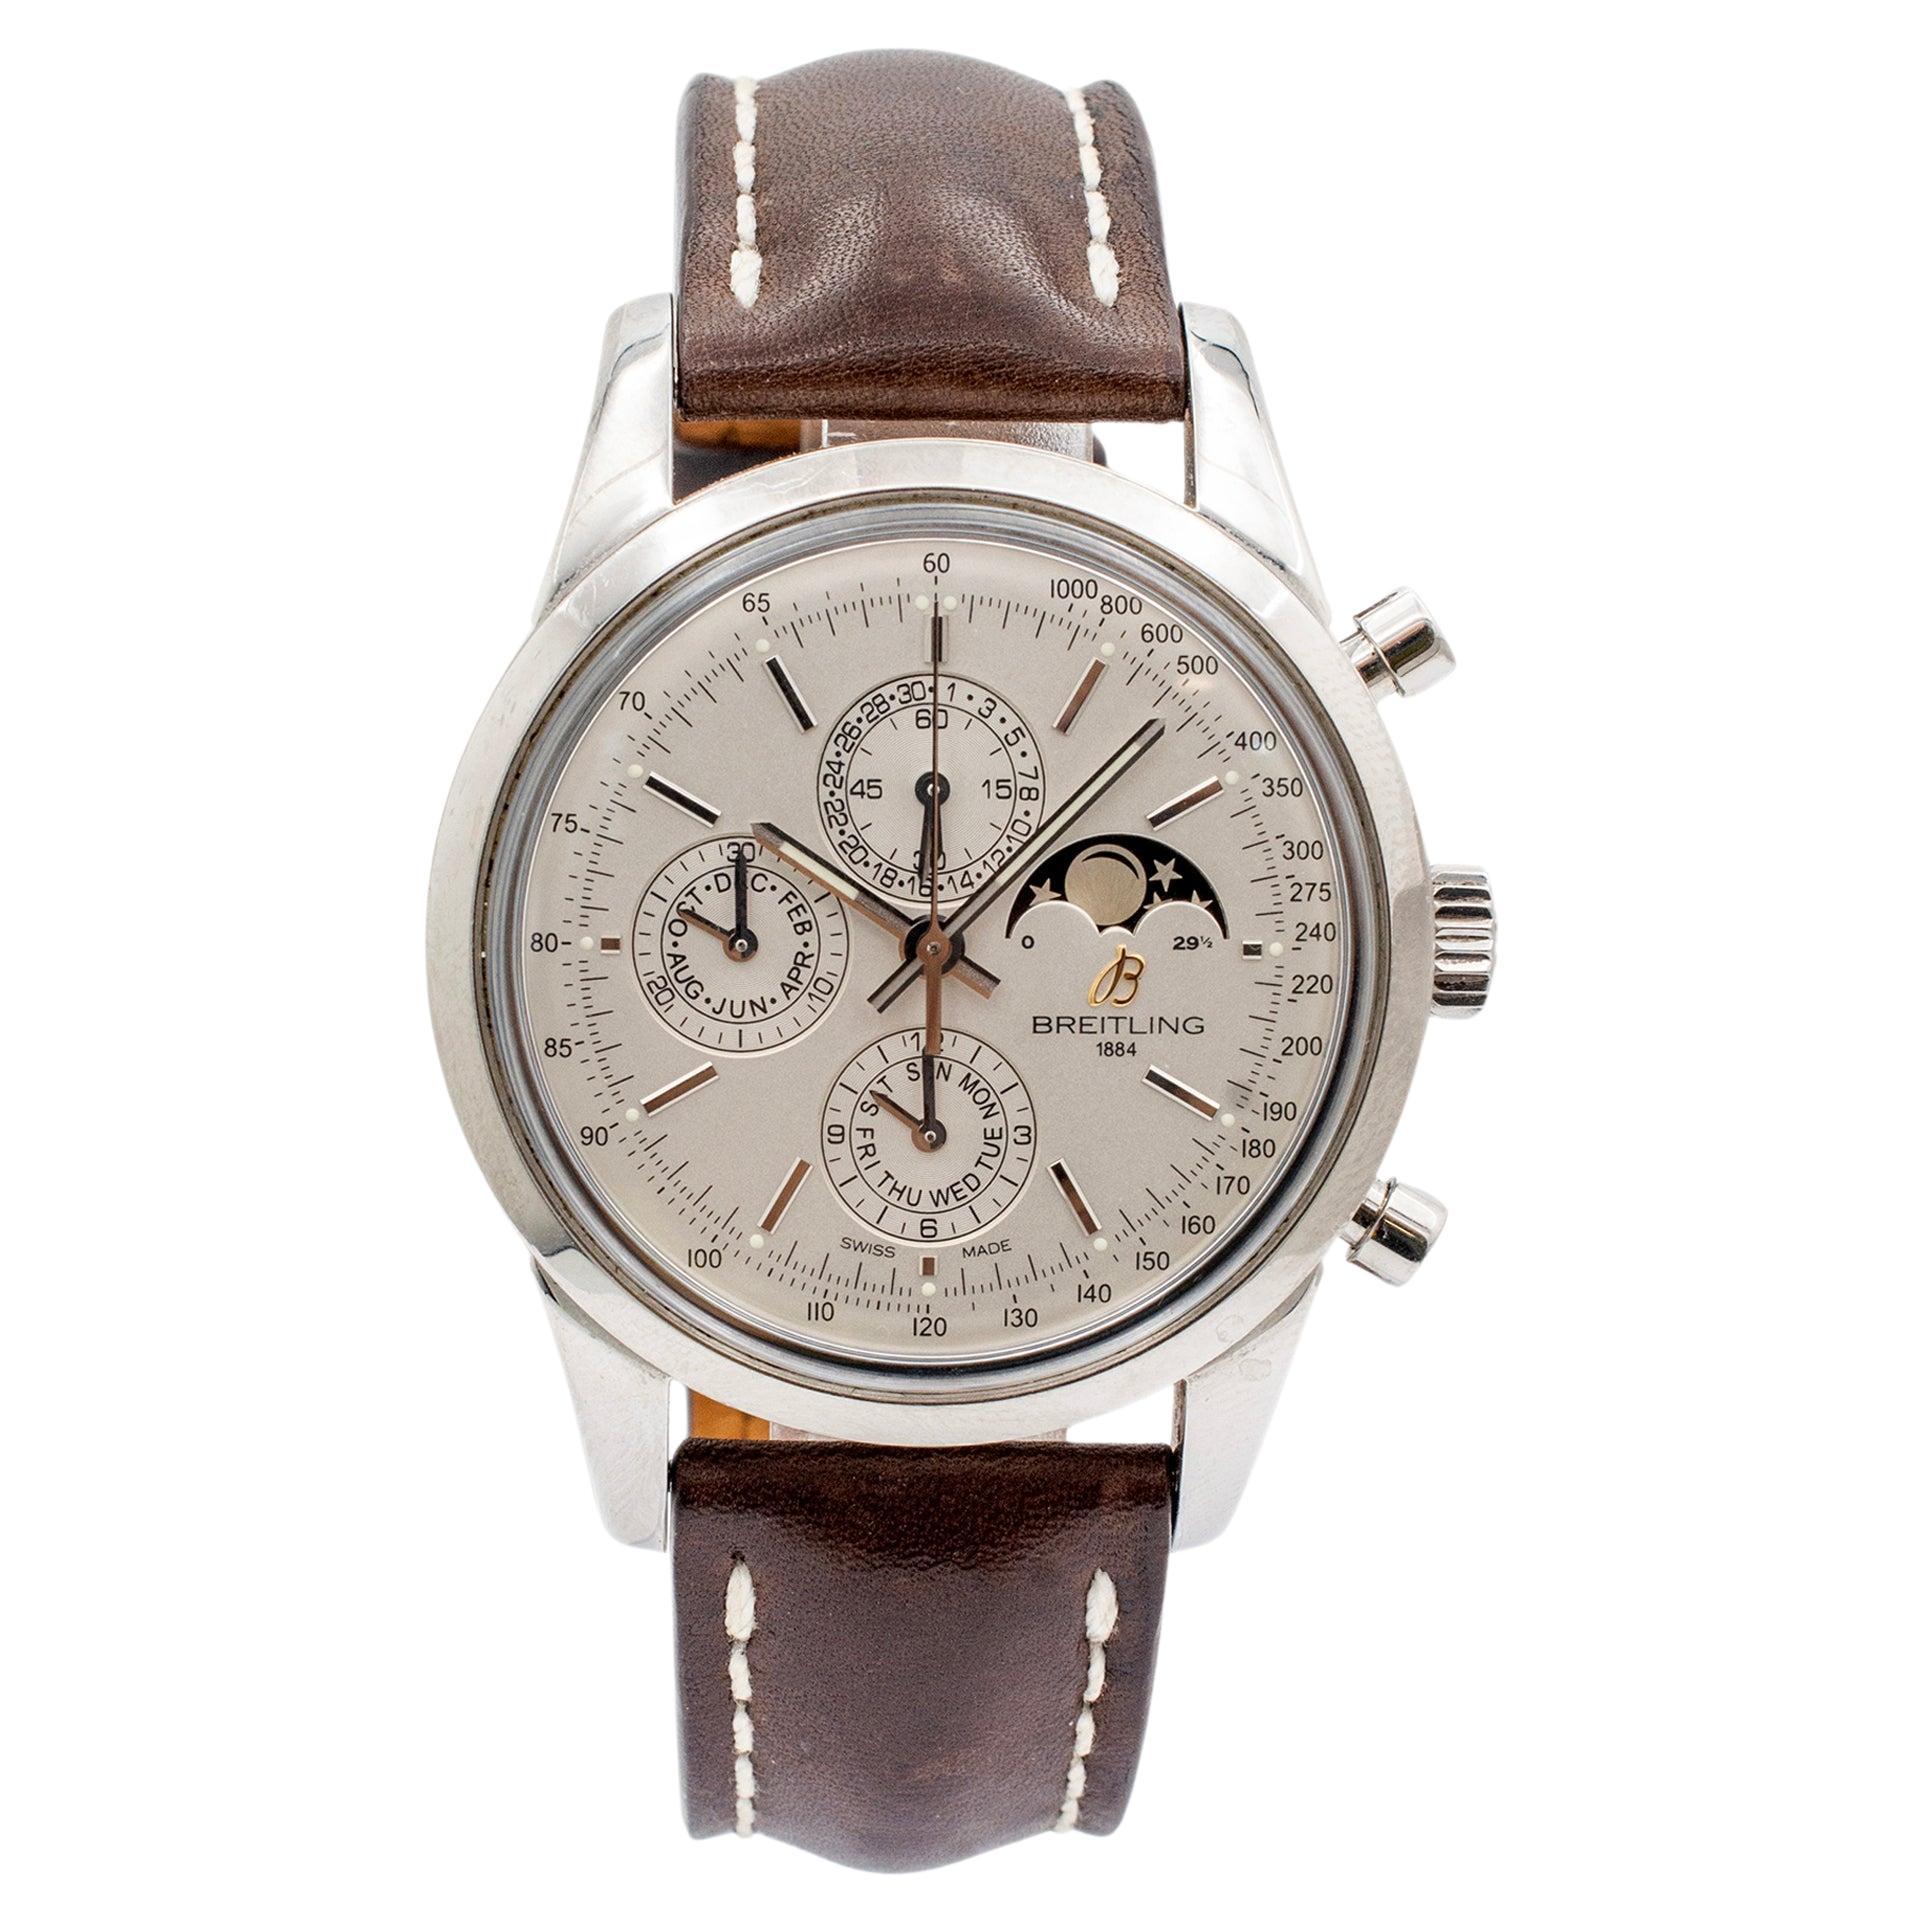 Montre Hommes Breitling Transocean Chronograph 1461 A19310 43MM Acier inoxydable